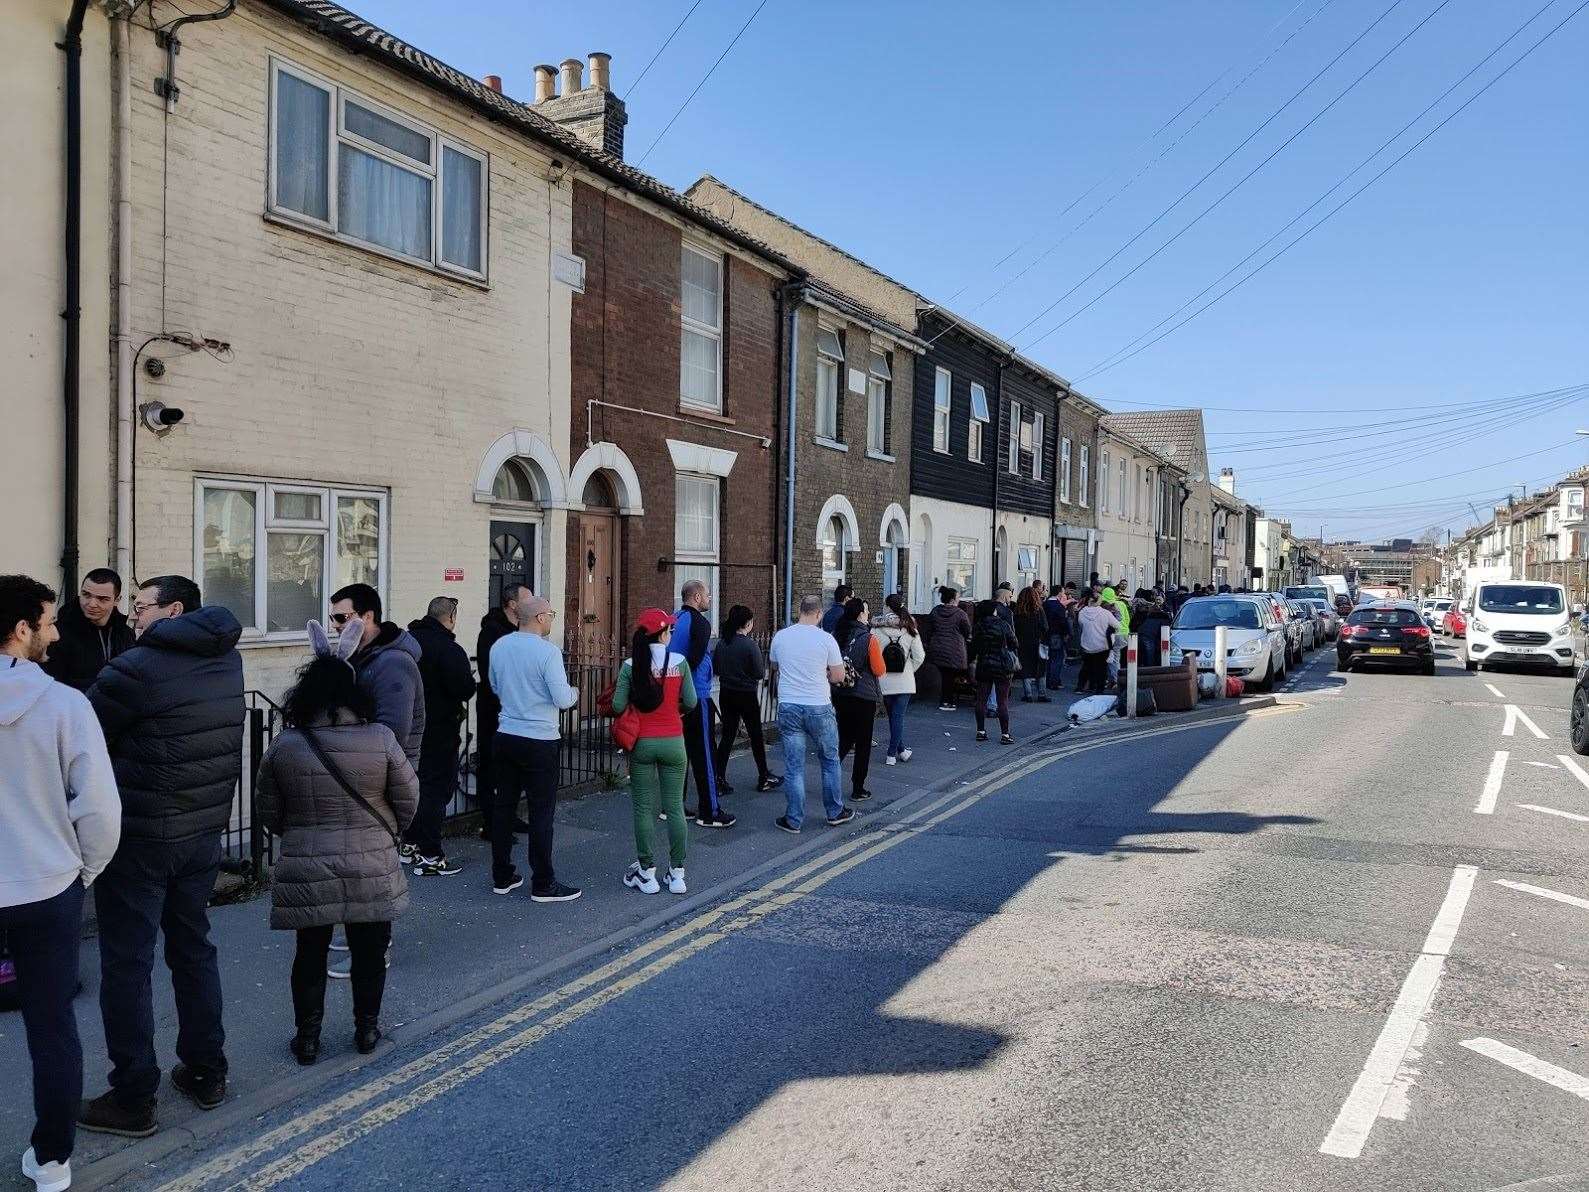 Hundreds of people could be seen queuing in the streets on Easter Sunday. Picture: George Atzev